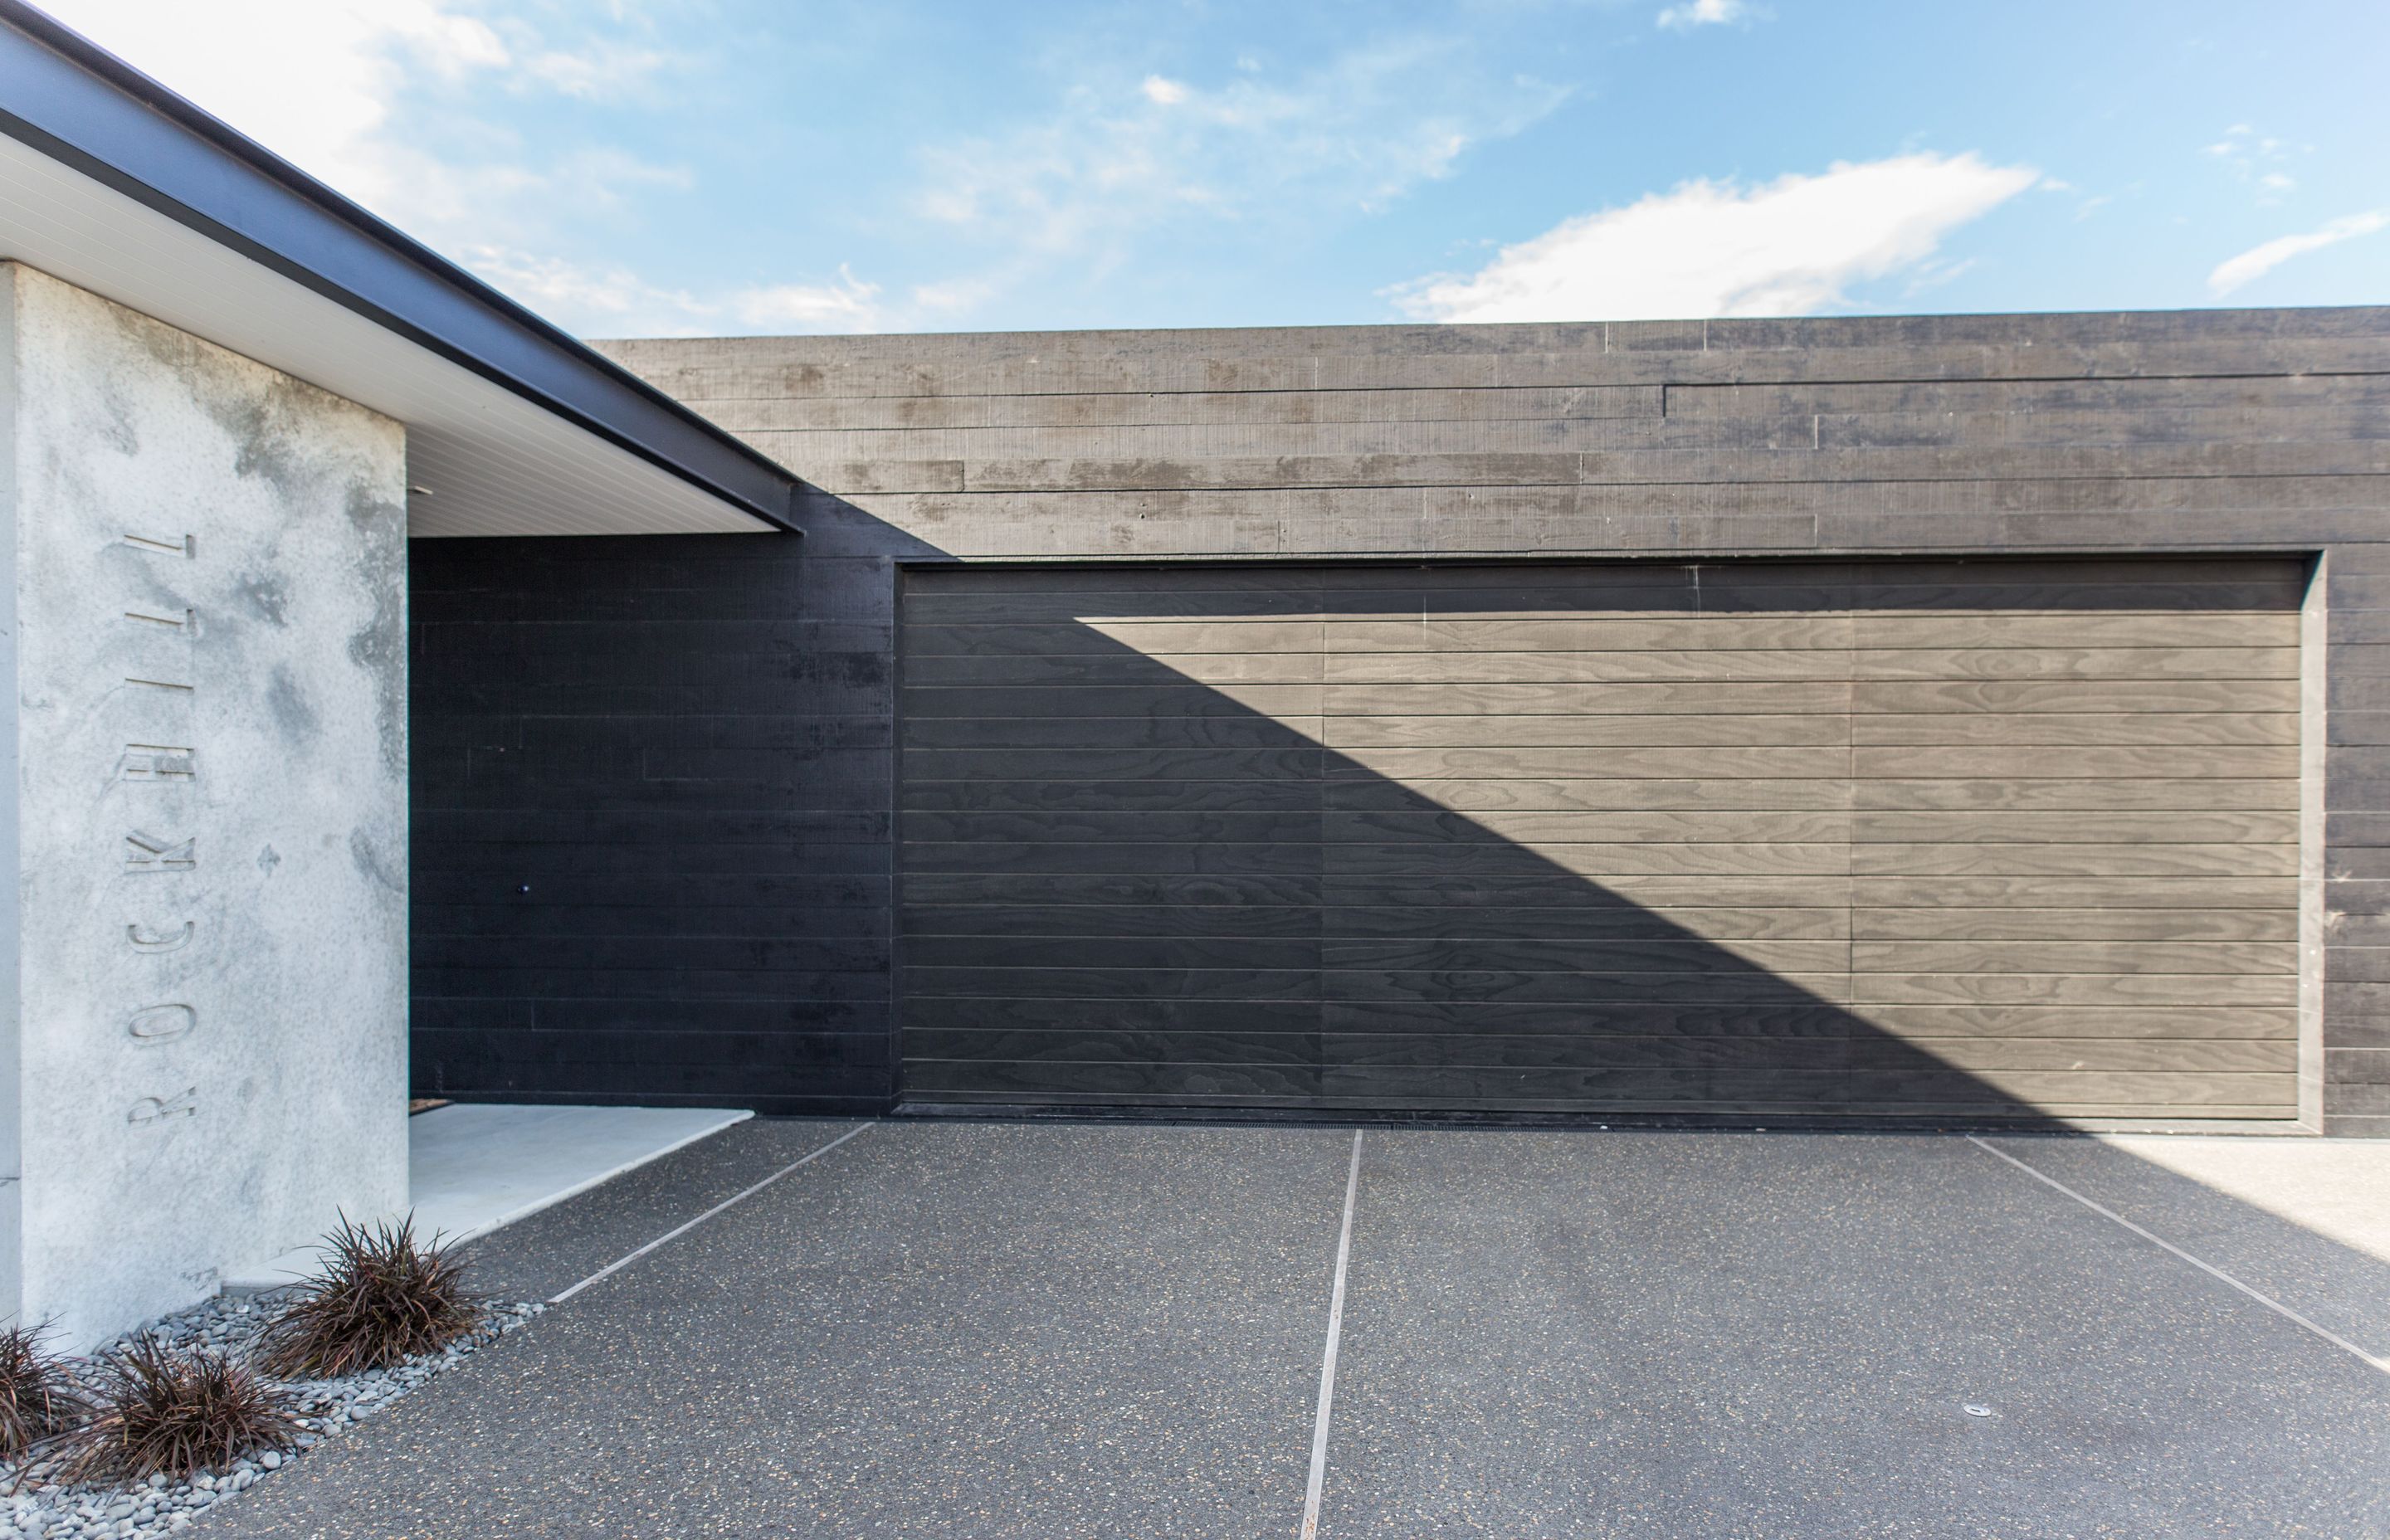 The plan features two separate forms, one private (containing the garage and guest bedrooms) painted black and one public, which has been left as raw concrete.